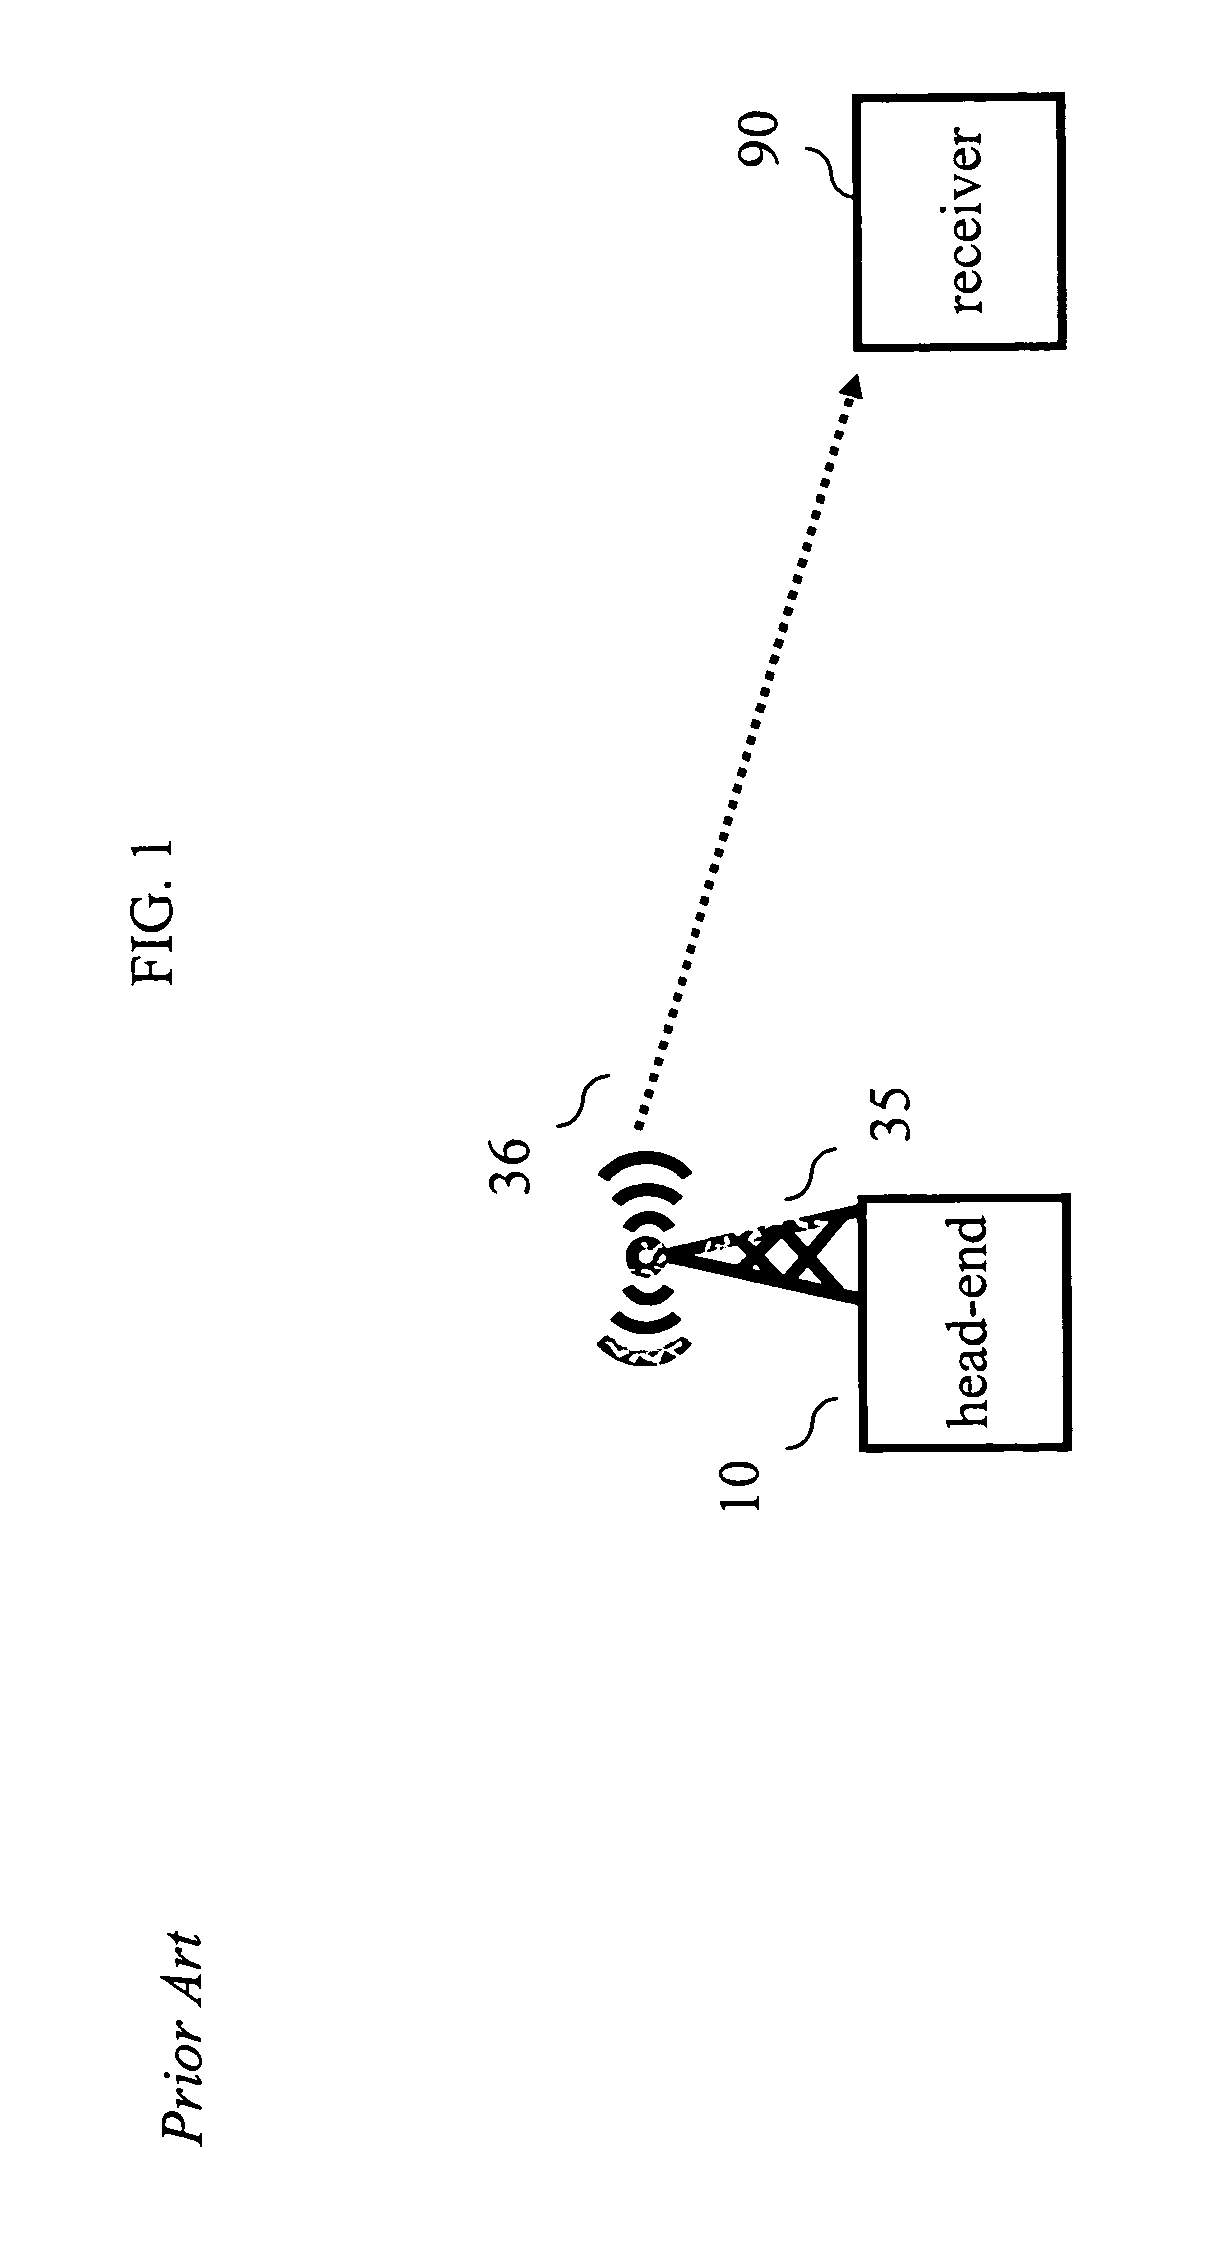 Synchronizing initialization data to time bursts in a mobile communications system